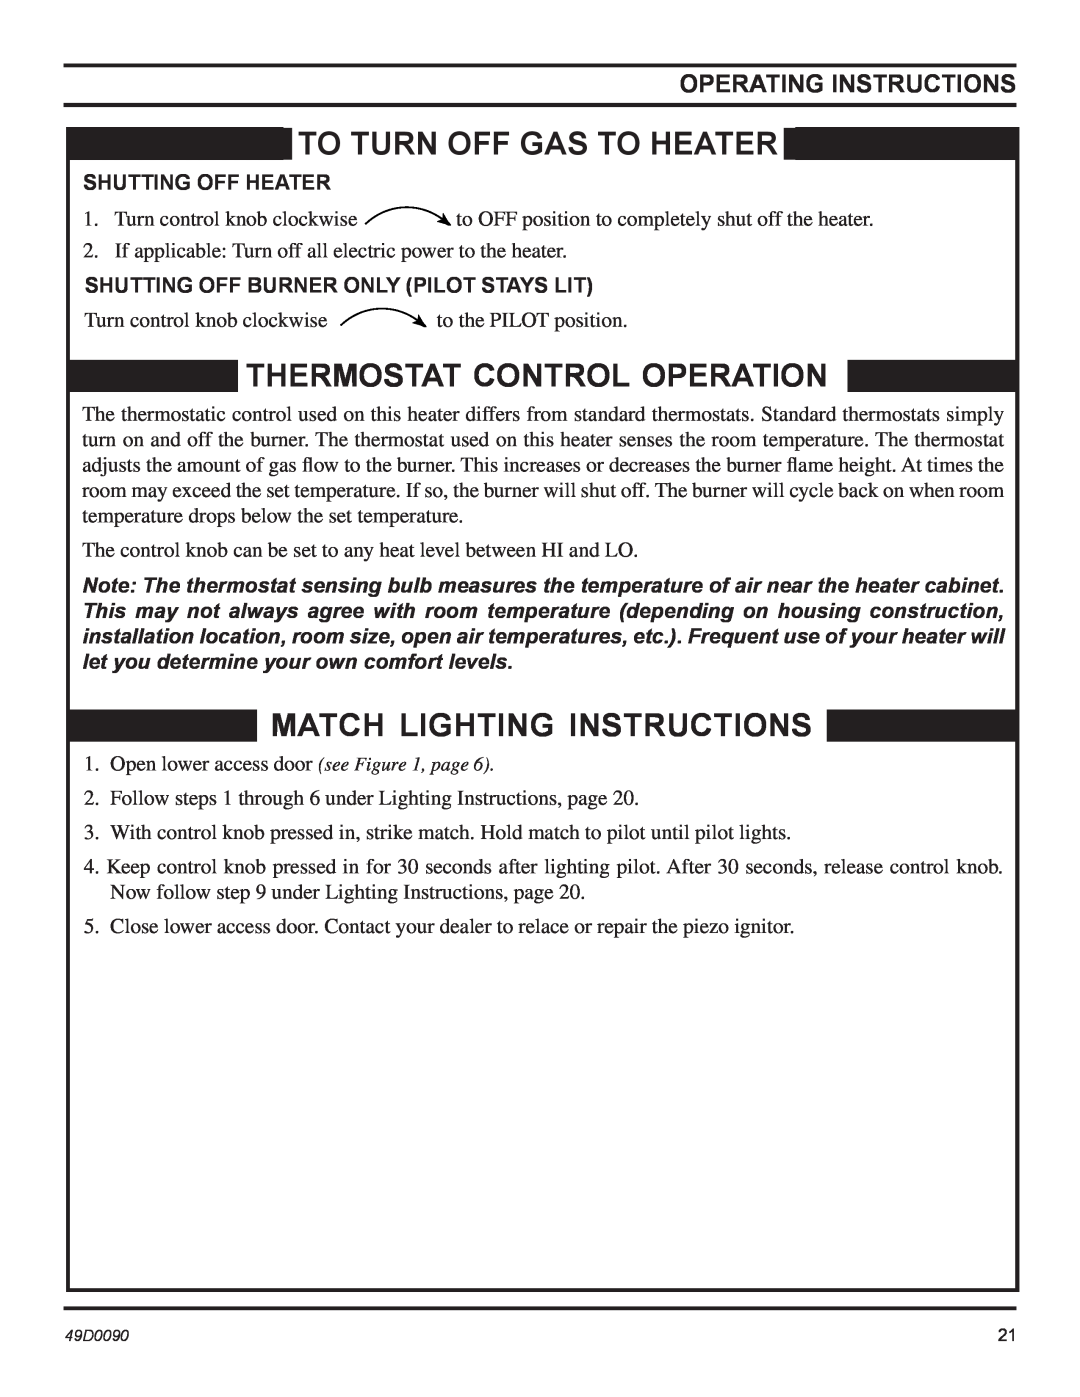 Monessen Hearth BTU/Hr To Turn Off Gas To Heater, Thermostat Control Operation, Match Lighting Instructions 